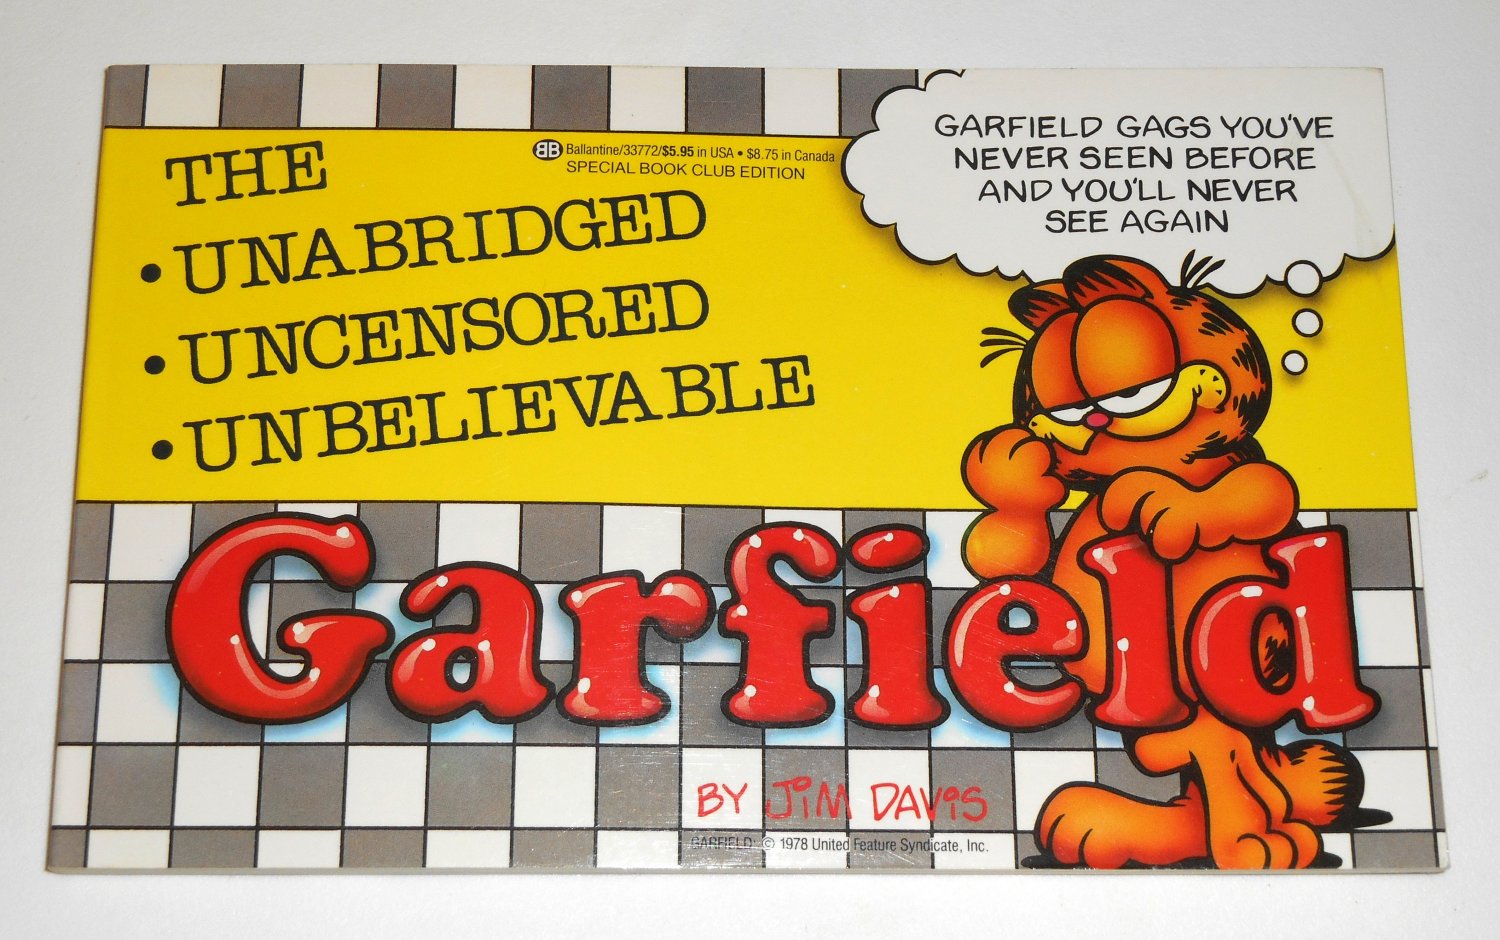 The Unabridged UnCensored Unbelievable Garfield Book Cat Paperback Soft Cover Odie PAWS Jim Davis